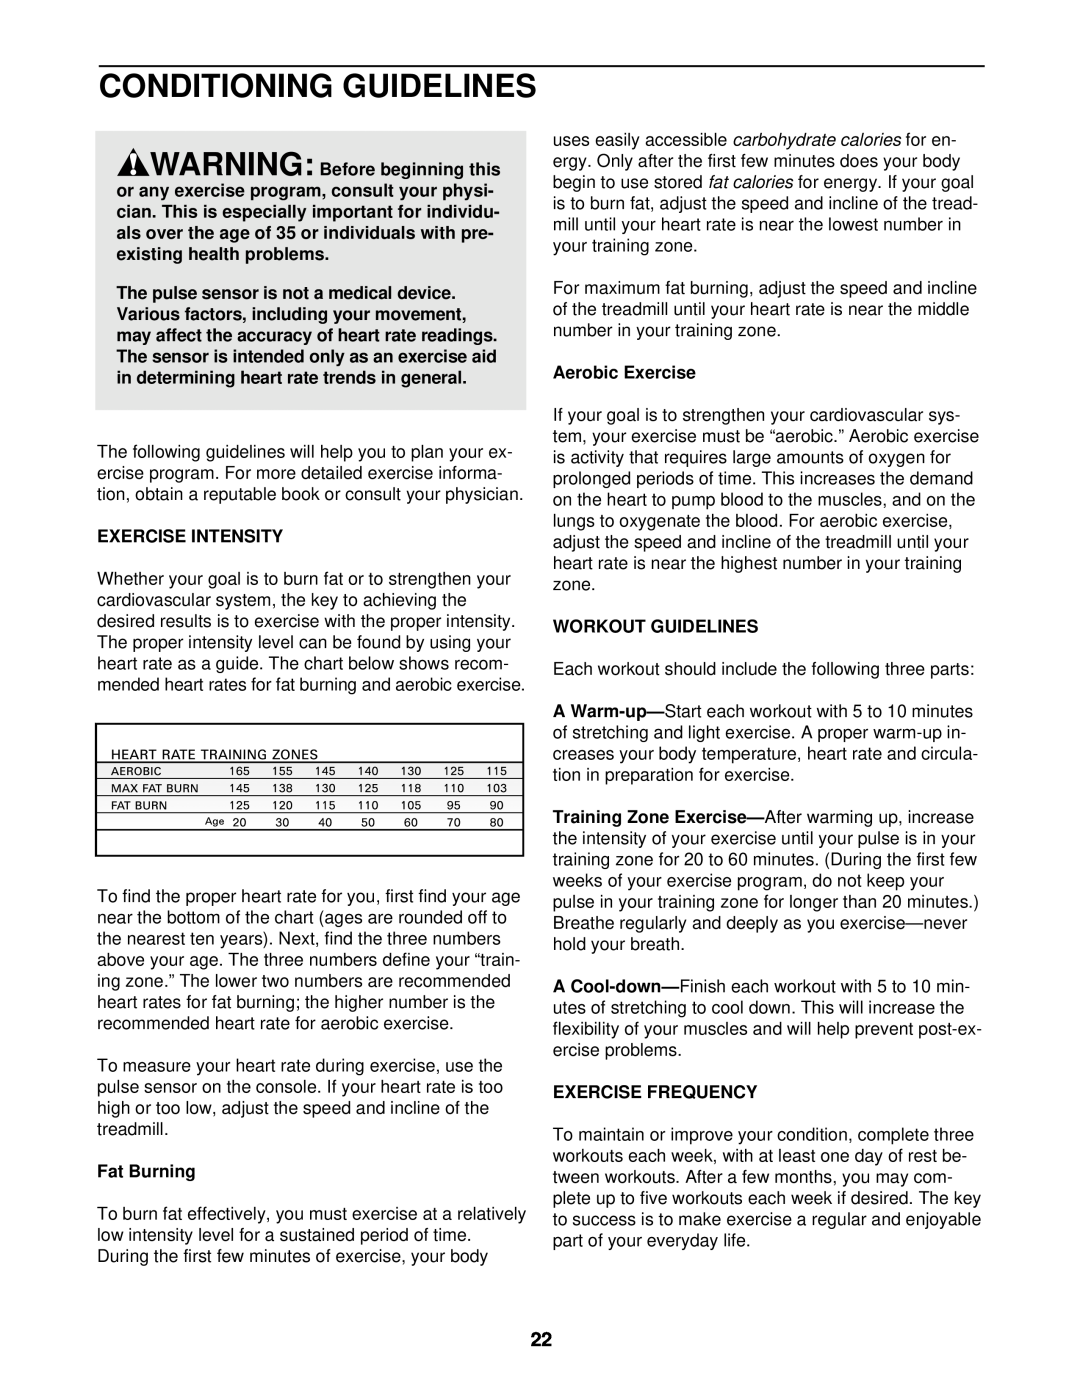 ProForm DRTL99720 user manual Conditioning Guidelines, Exercise Intensity, Fat Burning, carbohydrate calories, fat calories 